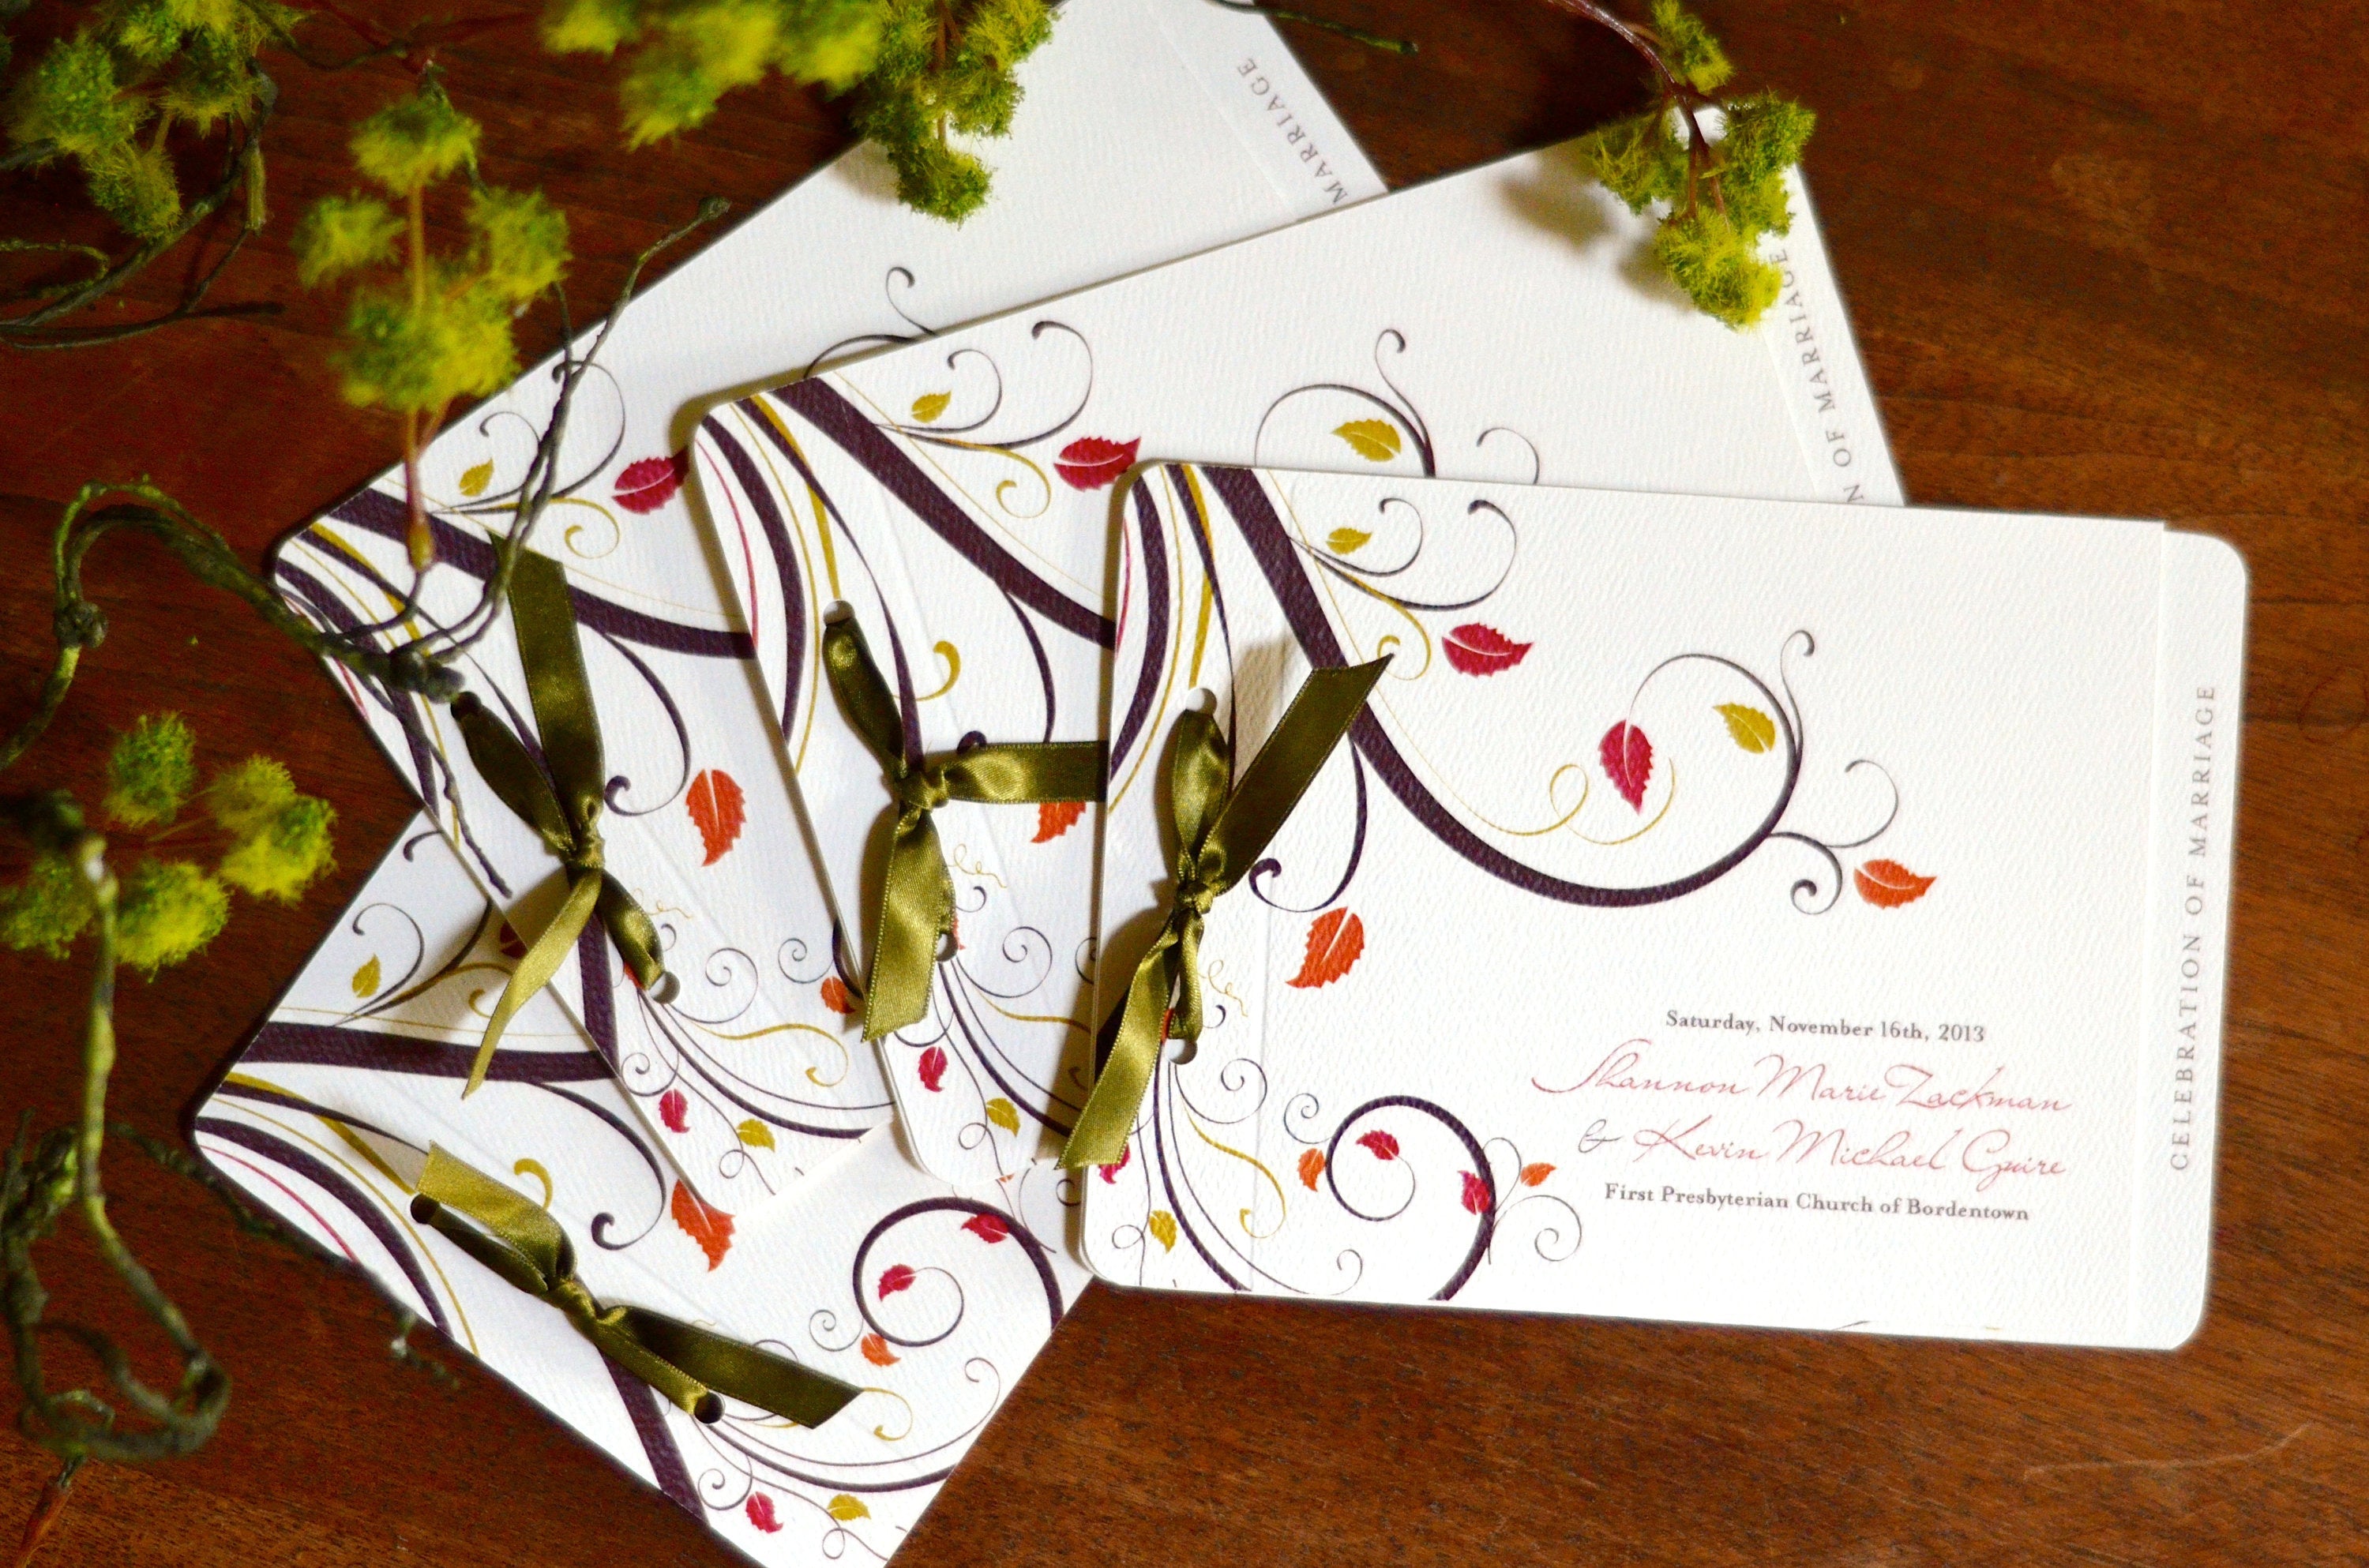 Rustic Fall Leaves 2 page Livret Booklet Wedding Program with Green Satin Ribbon // BP1